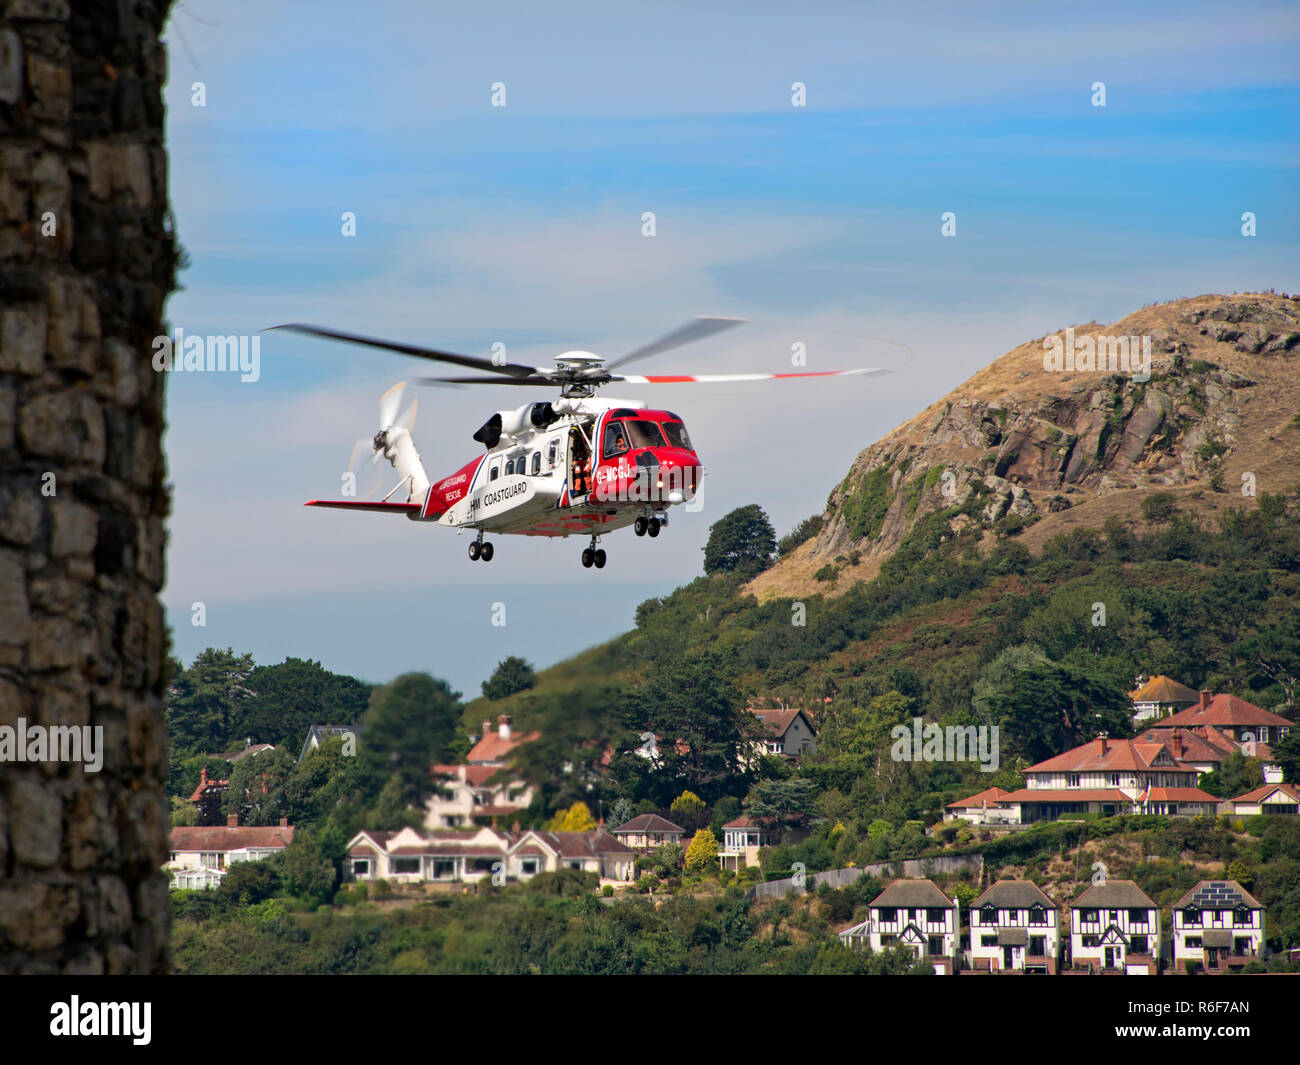 Horizontal view of a HM coastguards helicopter flying in the sky. Stock Photo